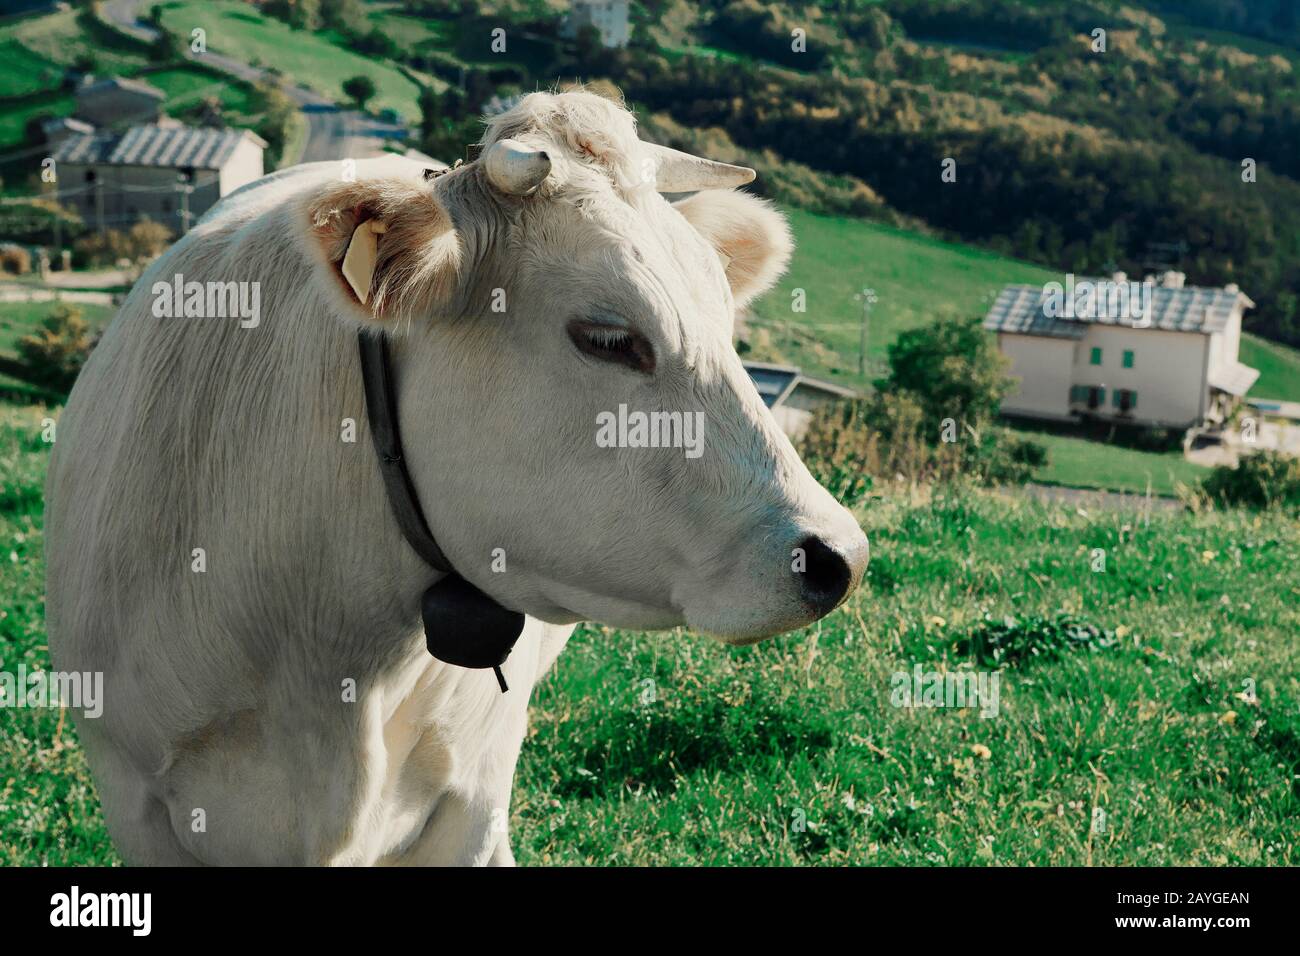 Happy cow free range grass fed in the mountains Stock Photo